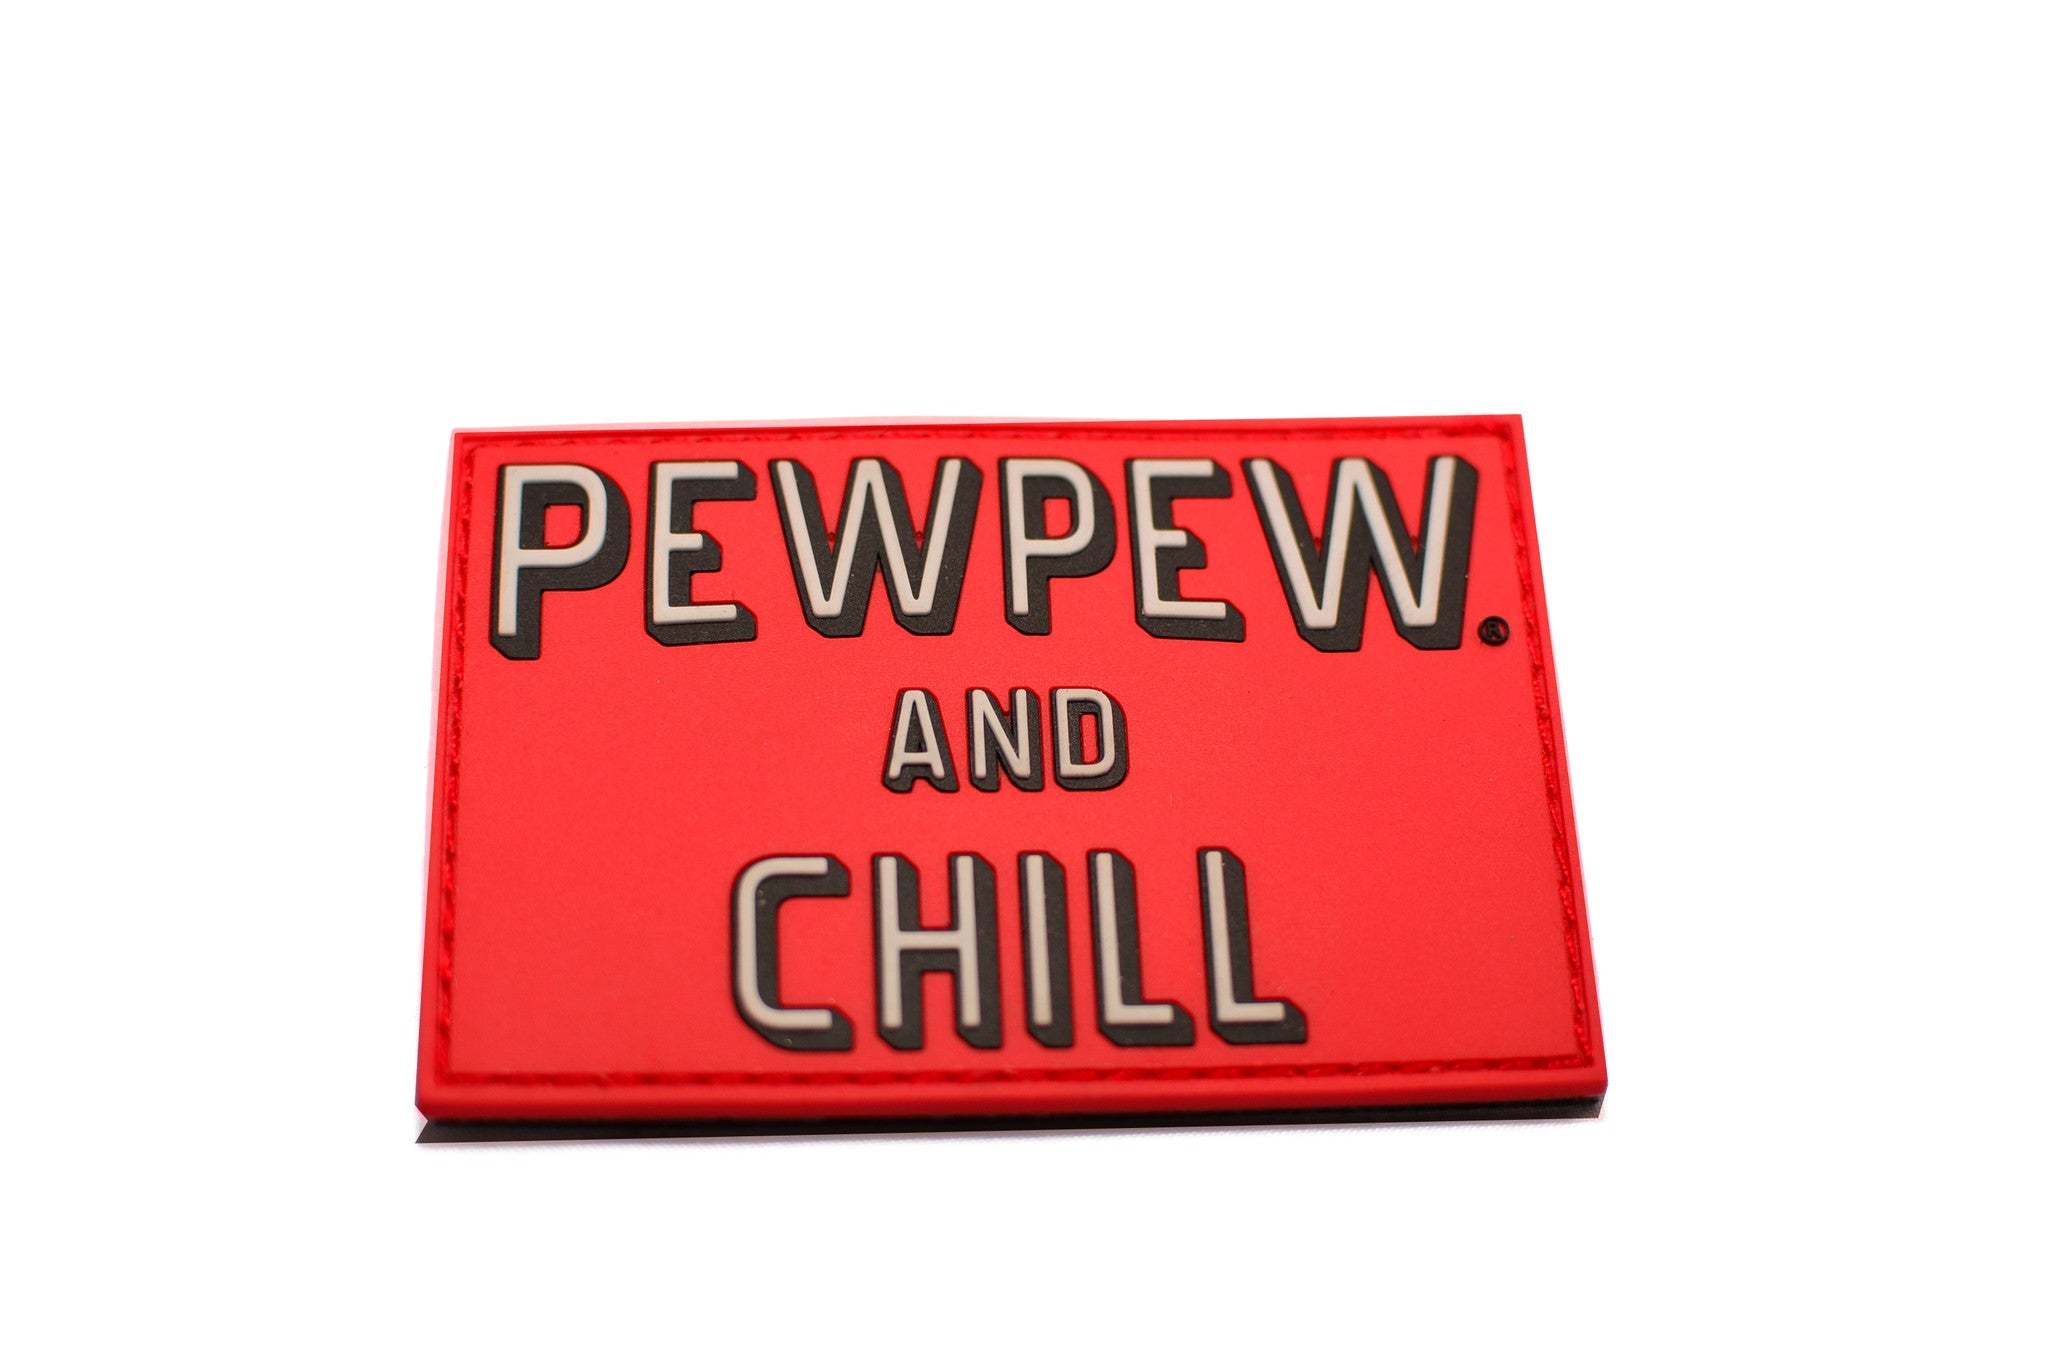 Pew Pew® And Chill 3x2 Pvc Patch Osi 